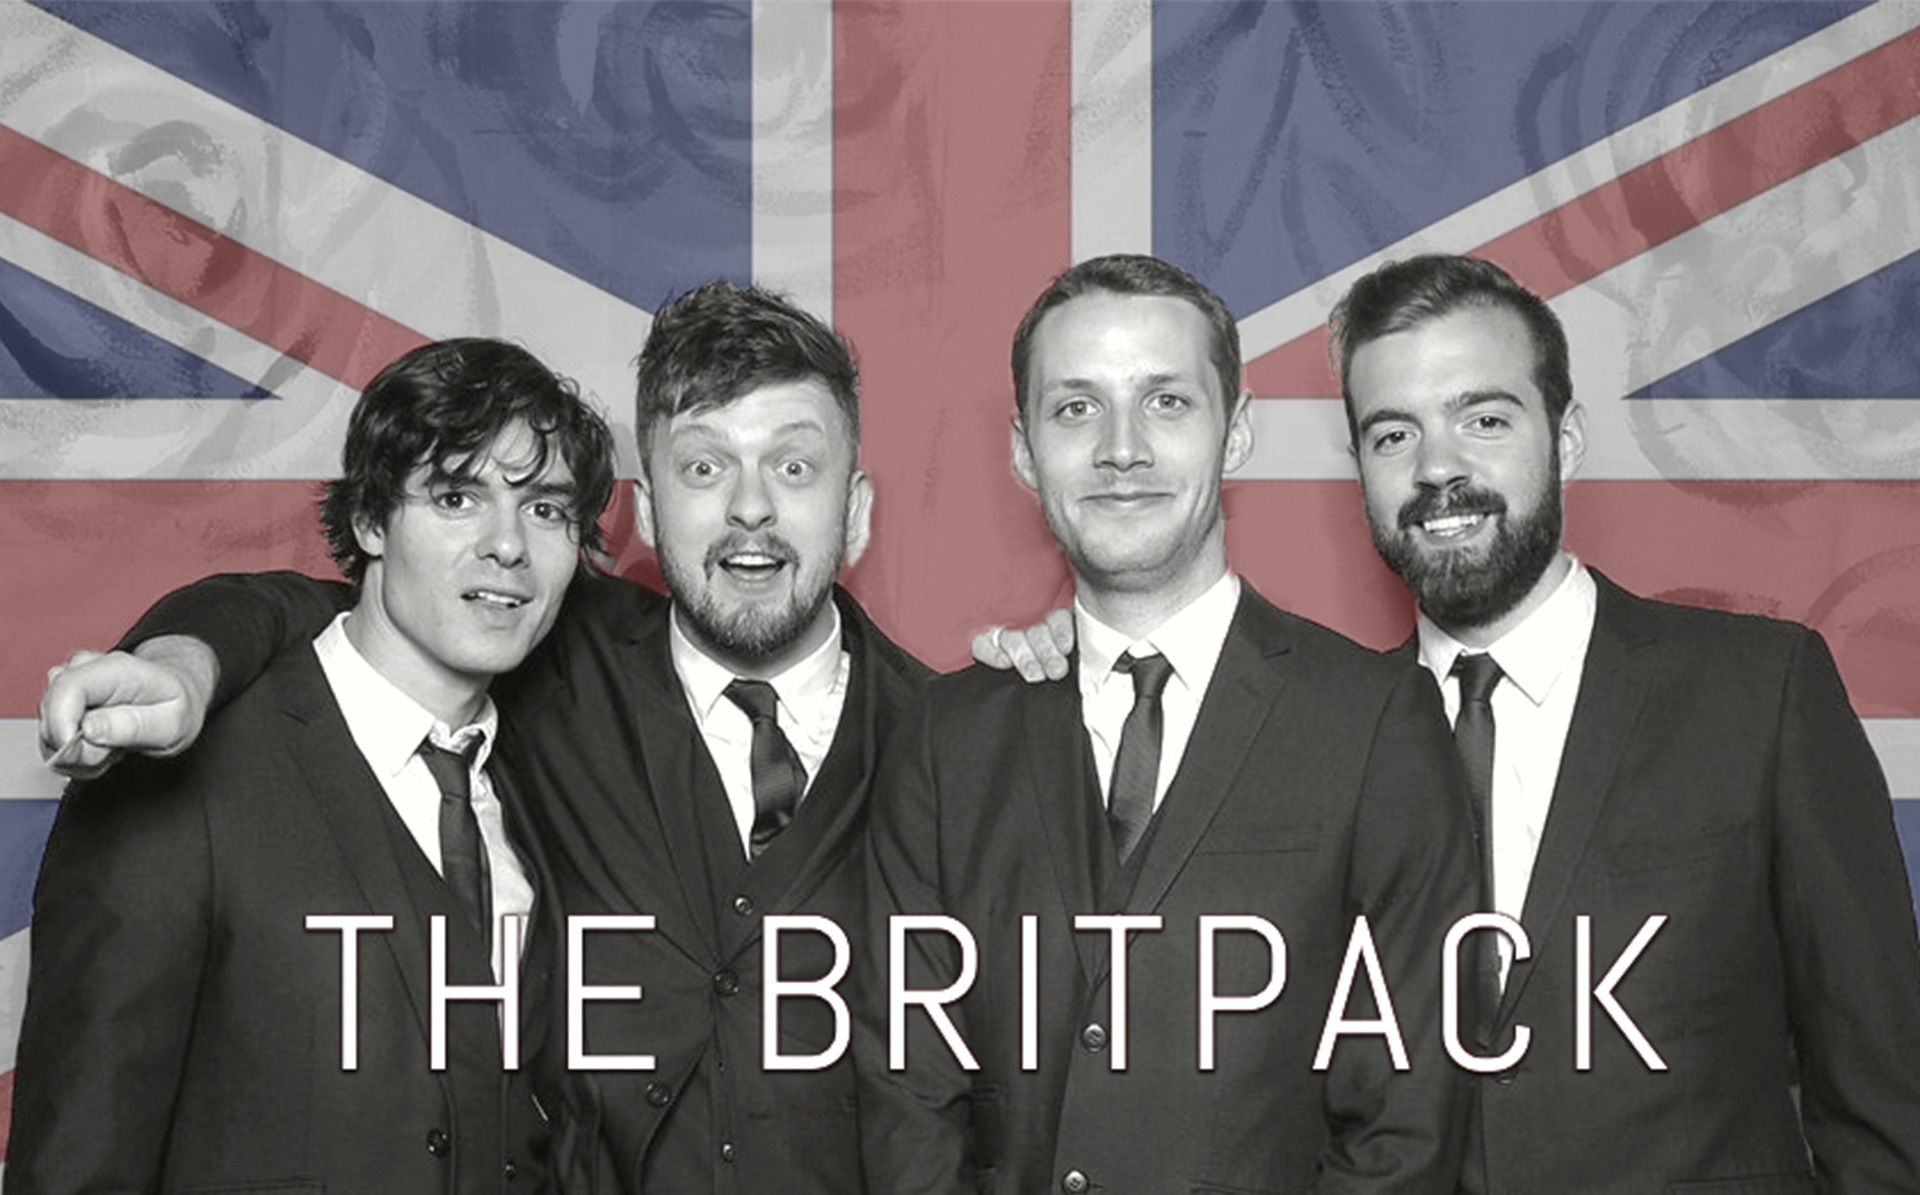 Four members of The Britpack in front of the British Flag